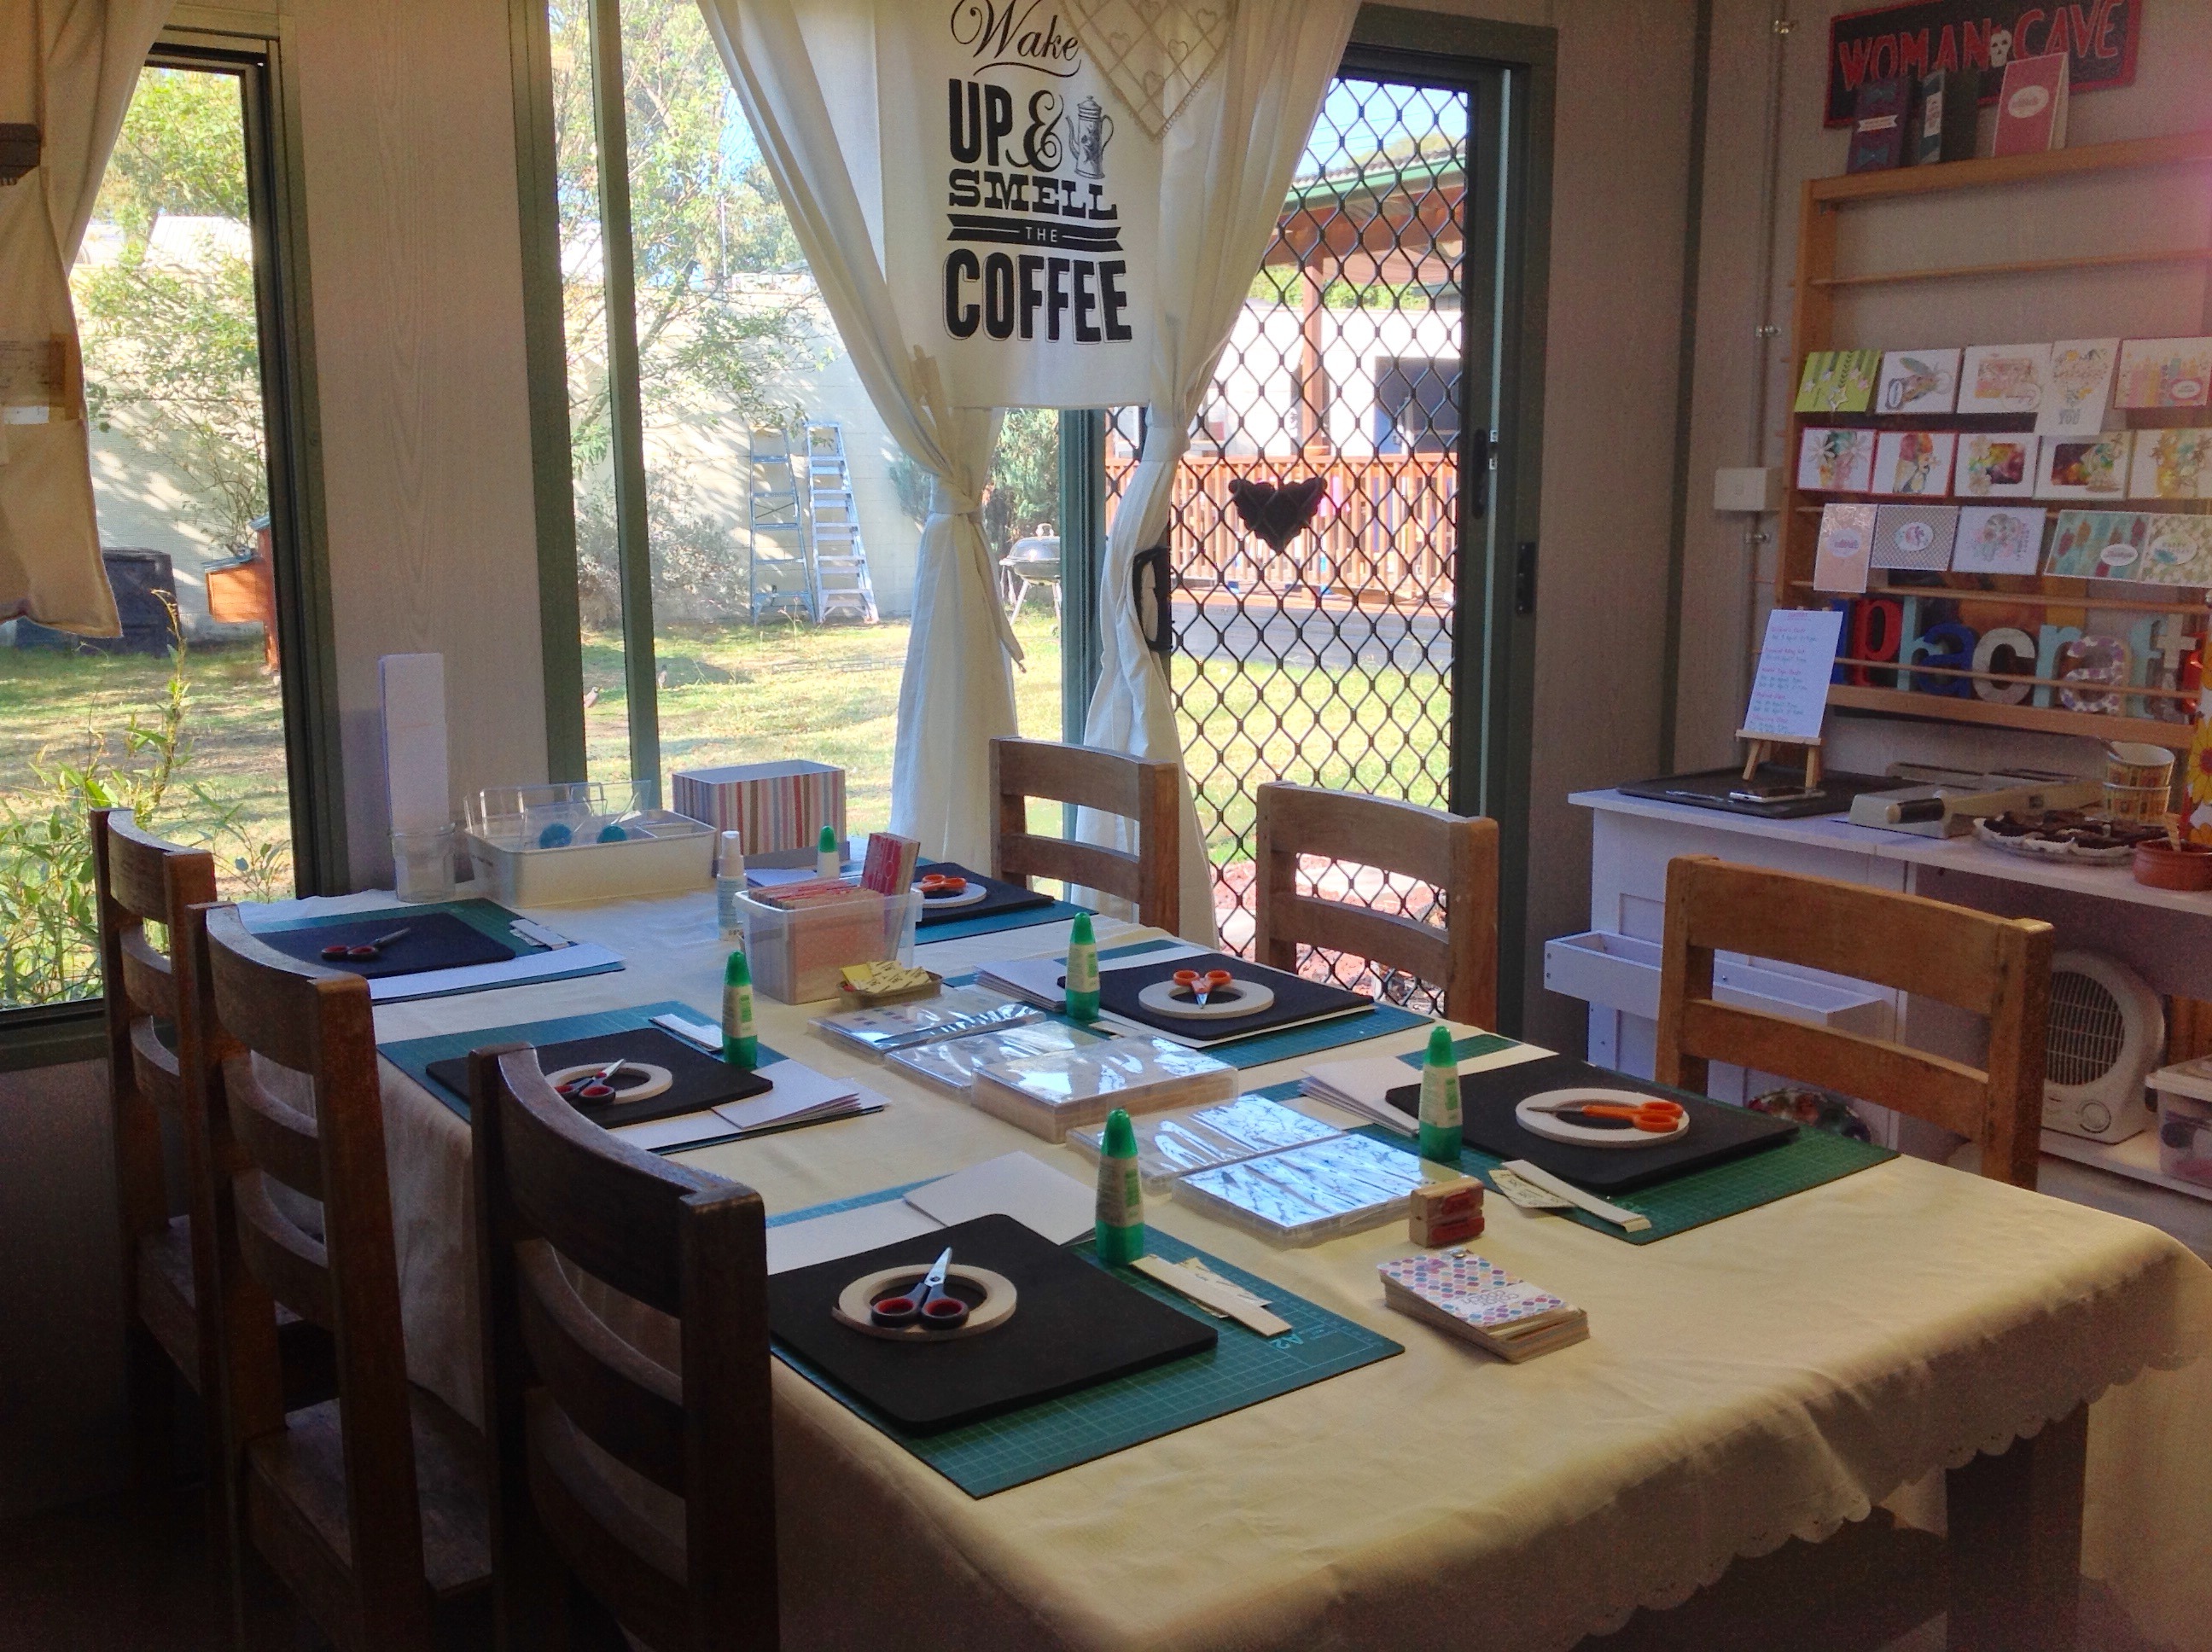 Alphacrafts Classroom all set up for card making classes.